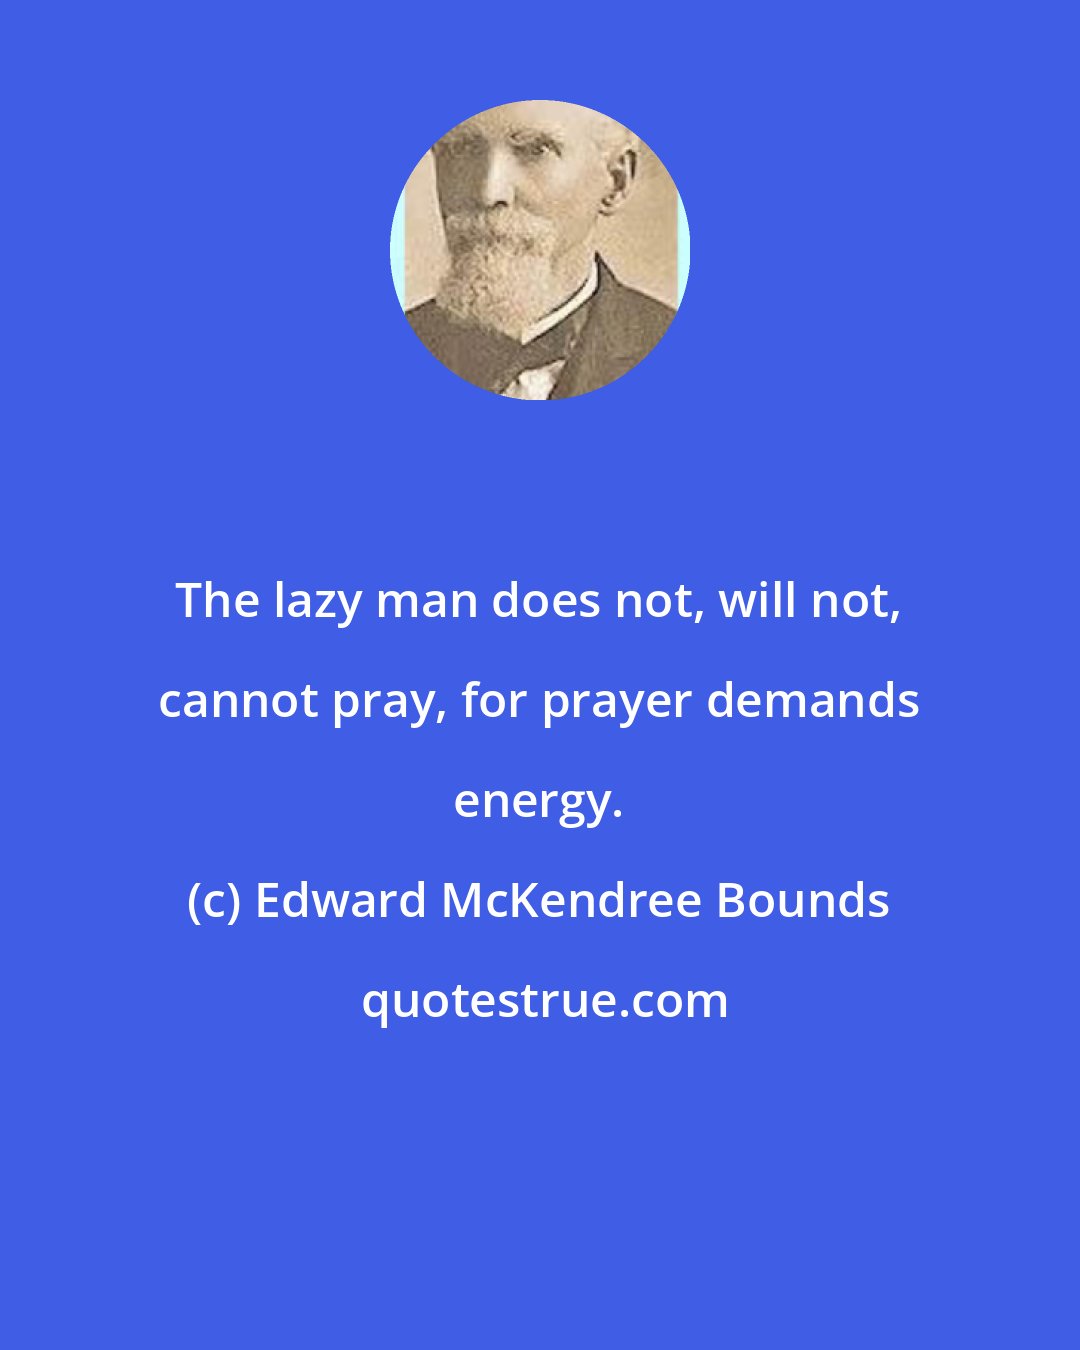 Edward McKendree Bounds: The lazy man does not, will not, cannot pray, for prayer demands energy.